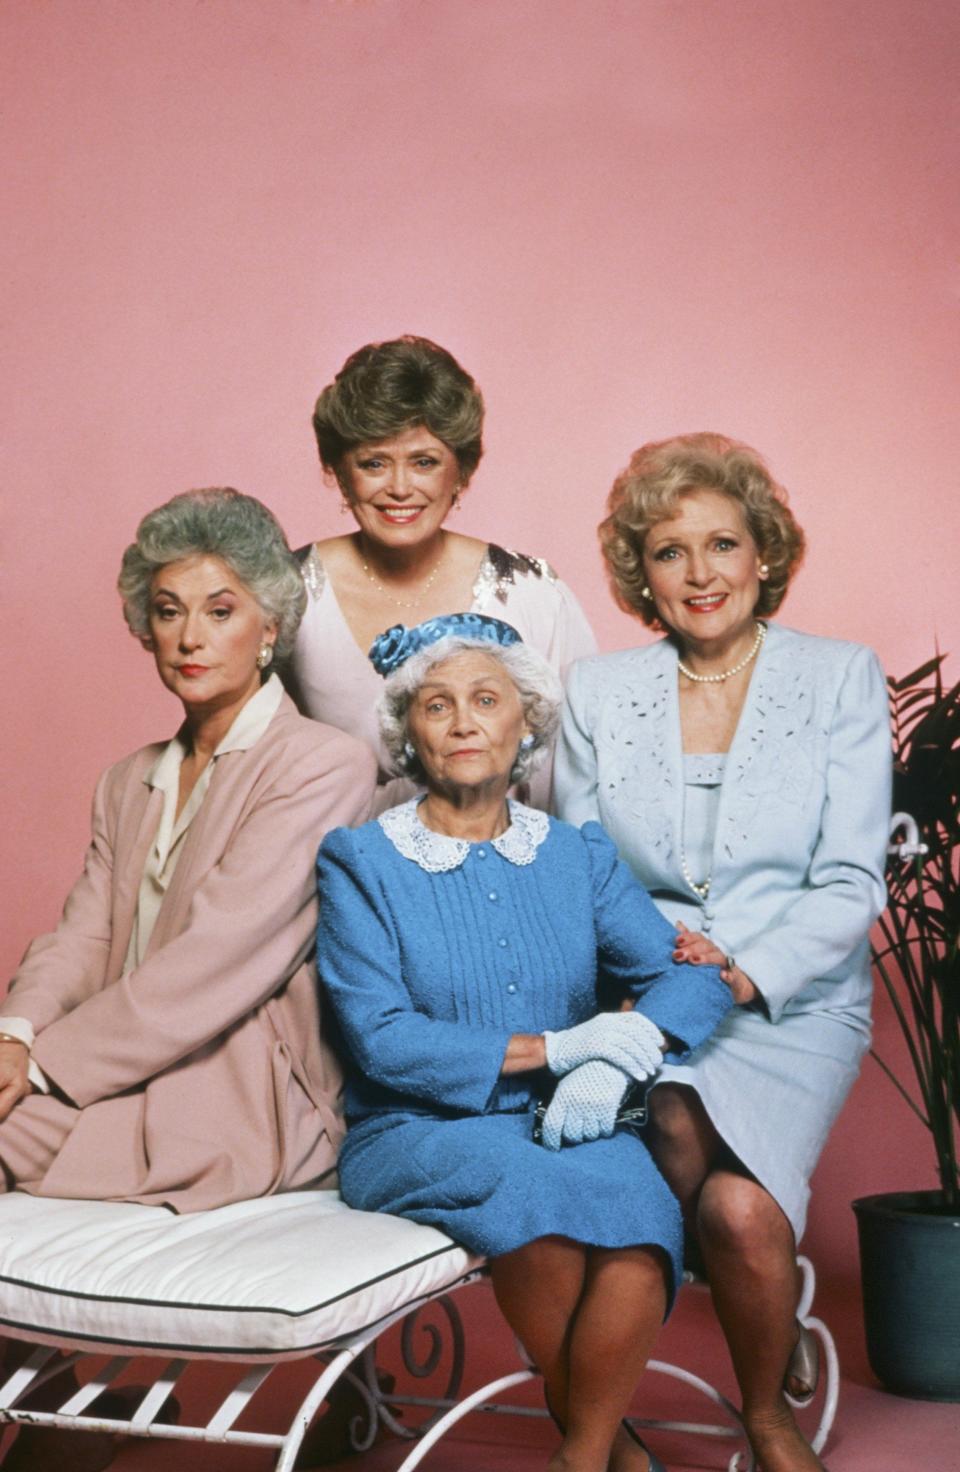 24 Photos of "The Golden Girls" Actresses Before They Landed the Show